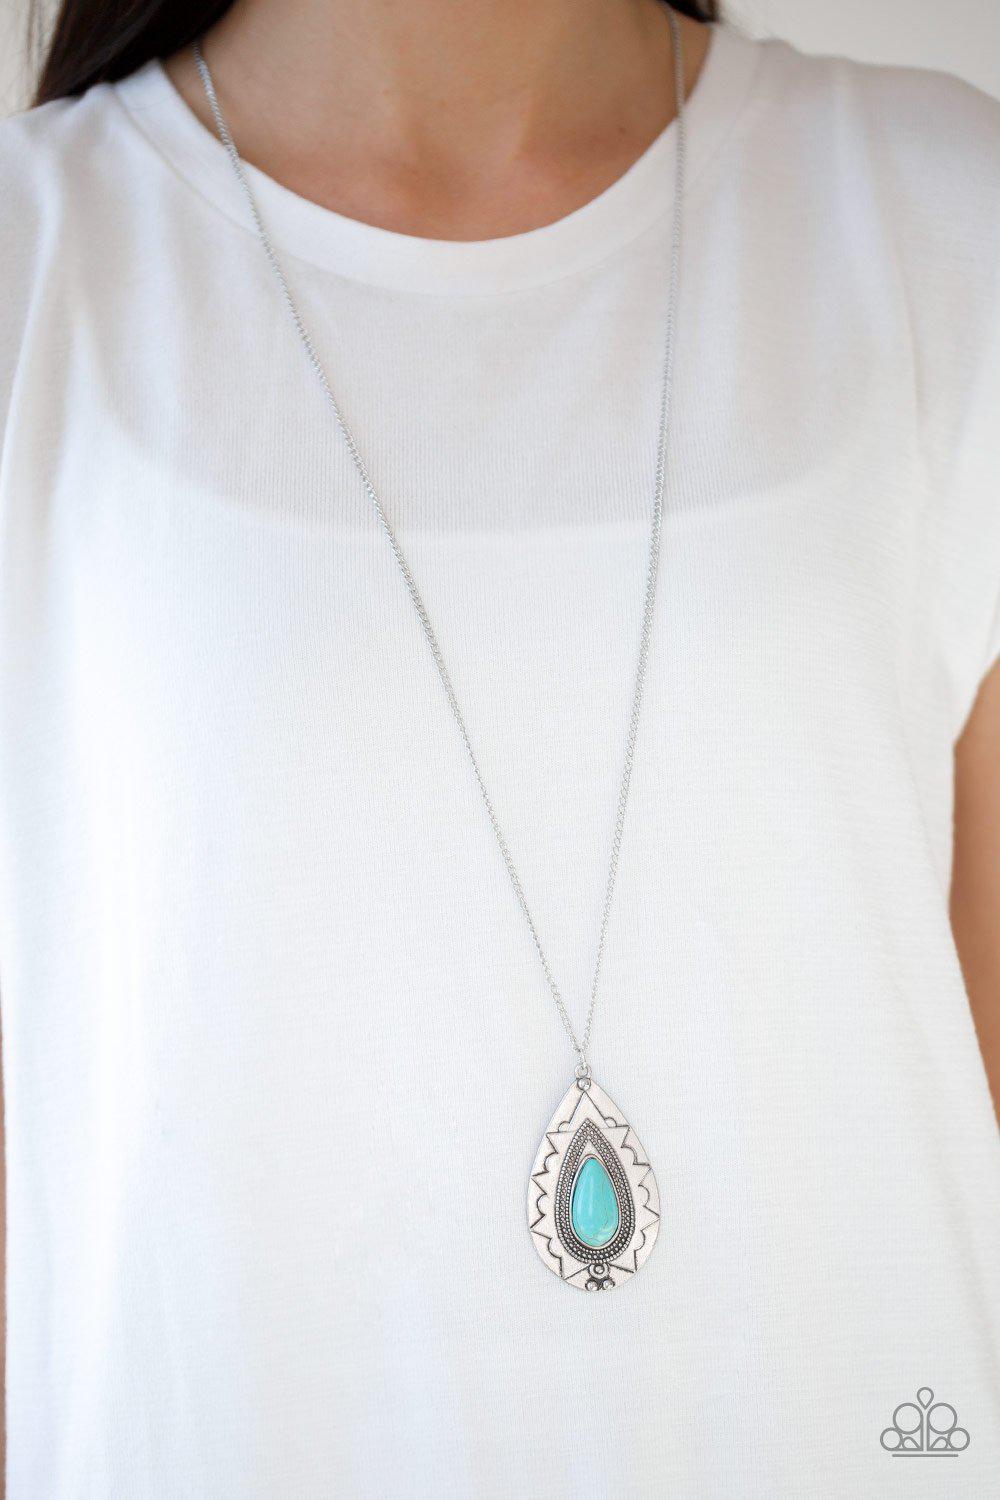 Sedona Solstice Turquoise Blue Teardrop Necklace - Paparazzi Accessories- lightbox - CarasShop.com - $5 Jewelry by Cara Jewels